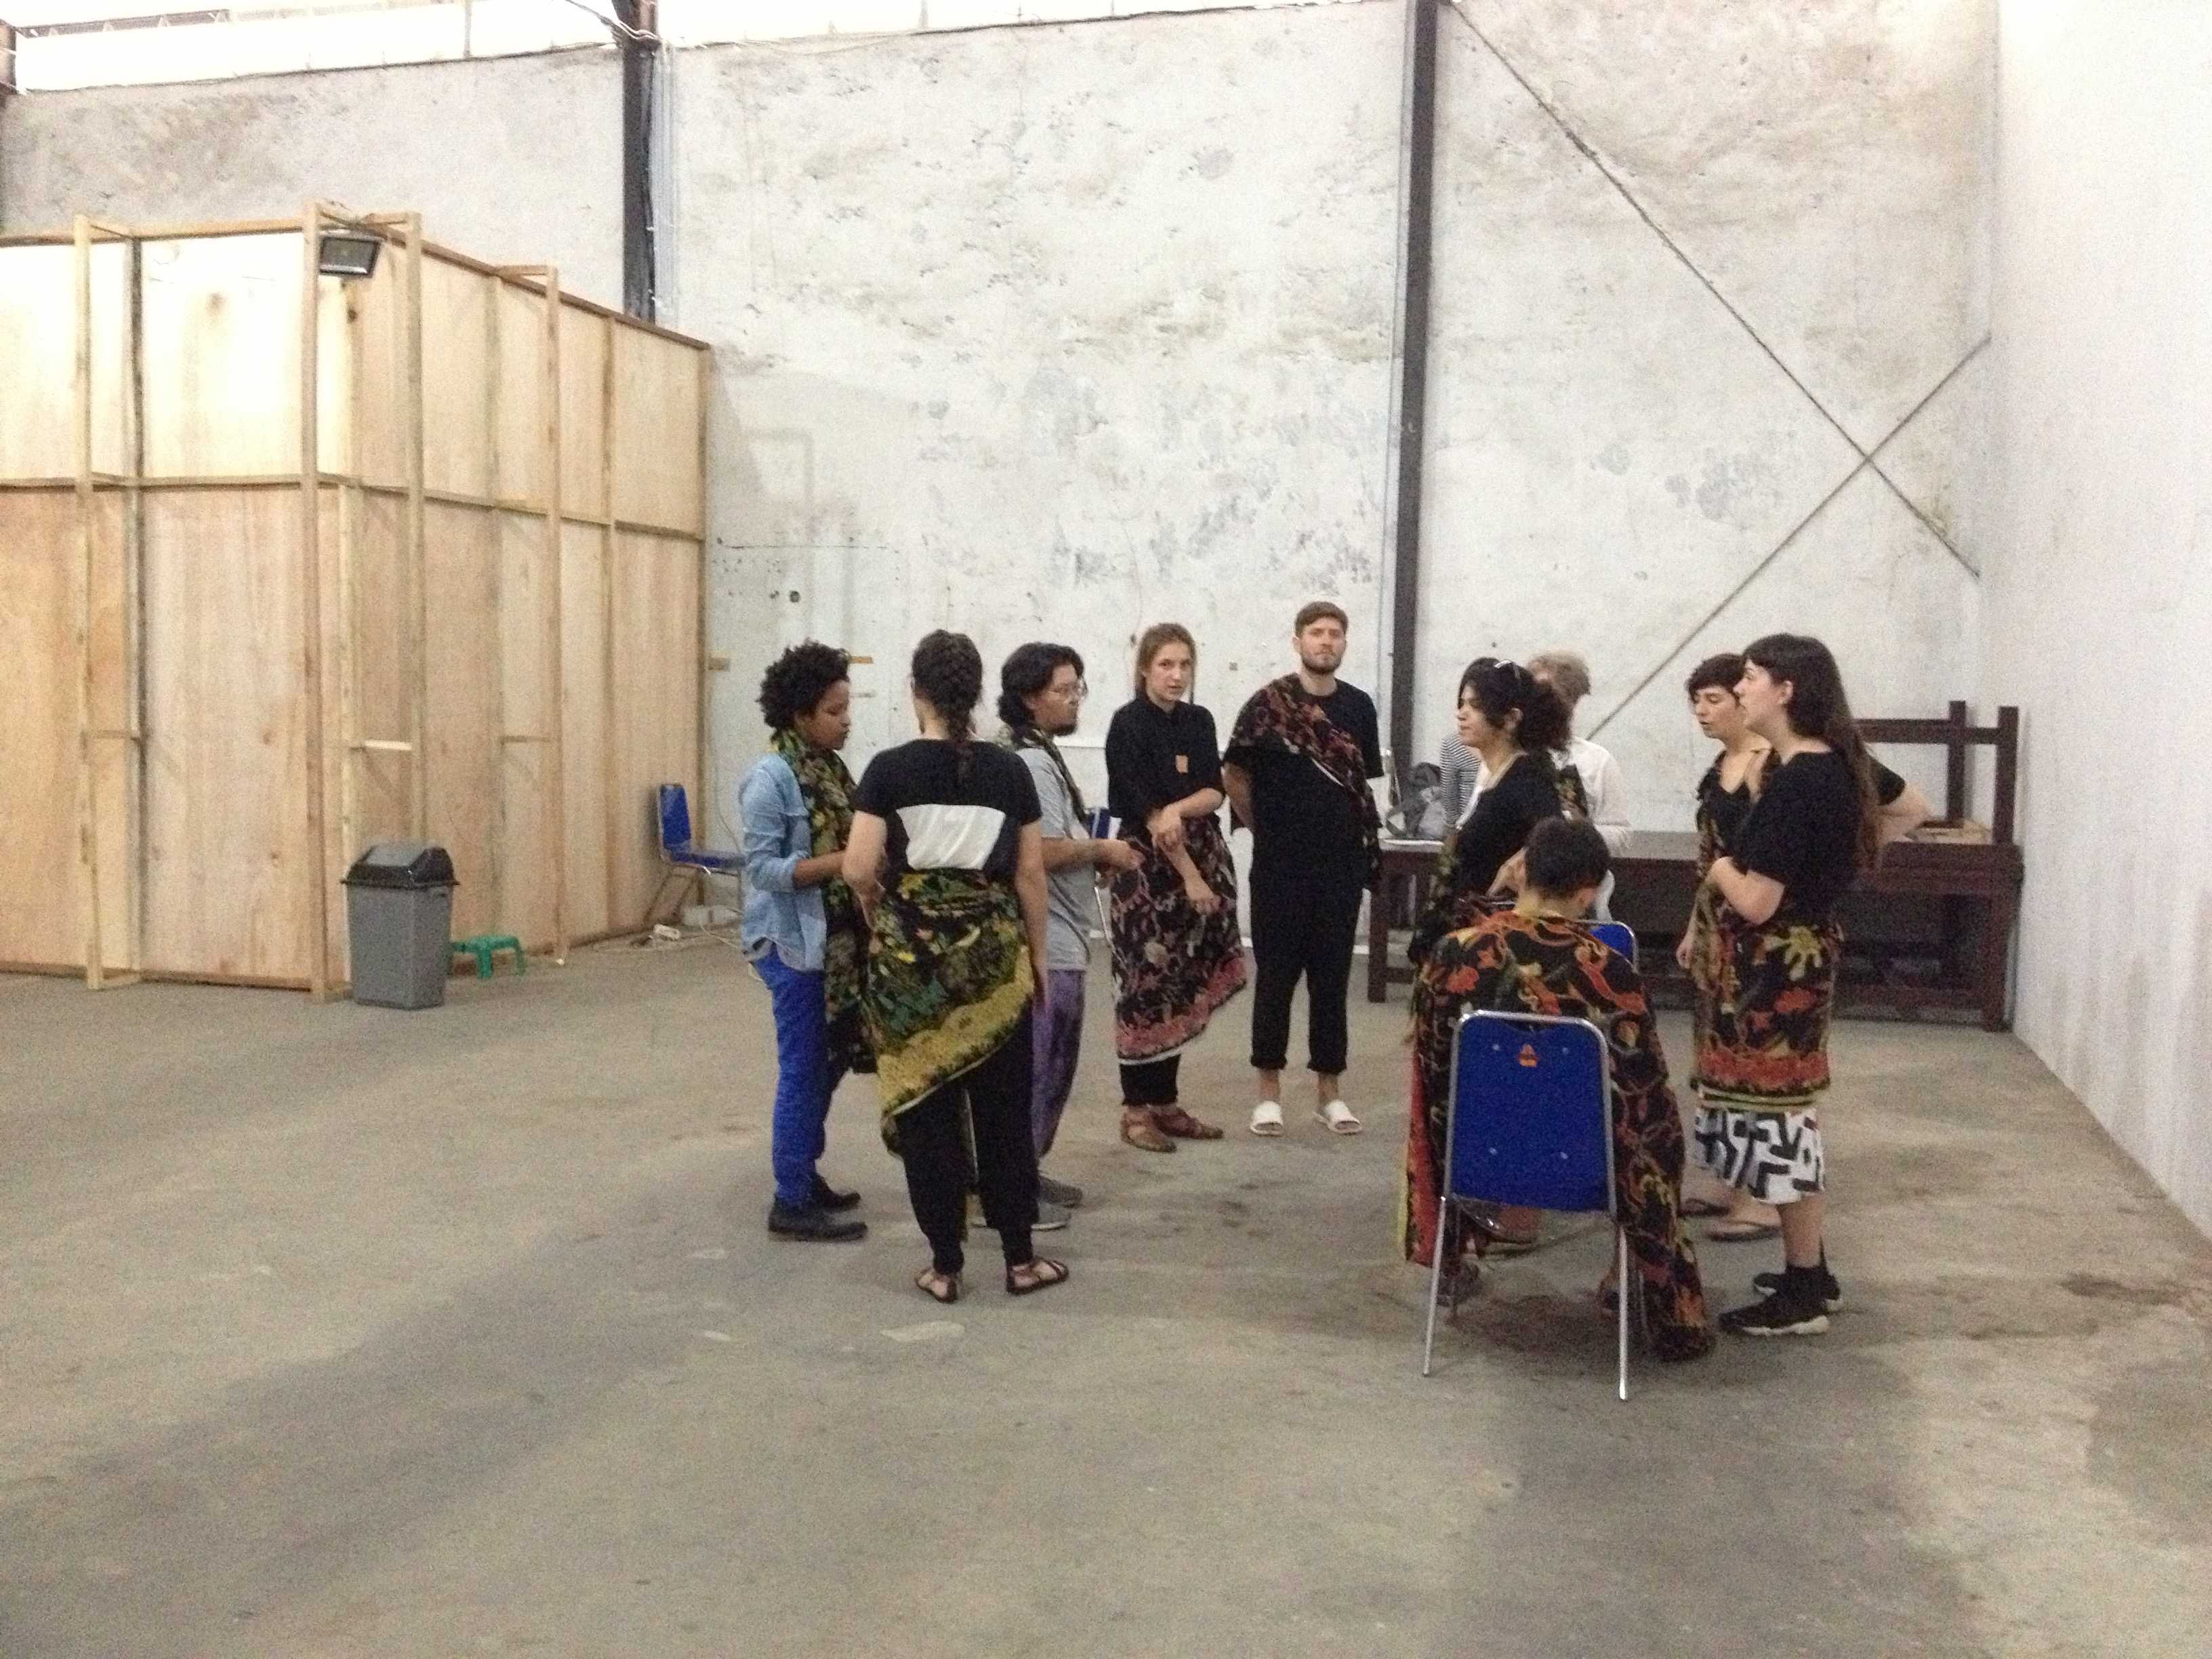 NON-TRANSMITTABLE FORM group at the Jakarta Biennale, 2015 - preparing for group performance